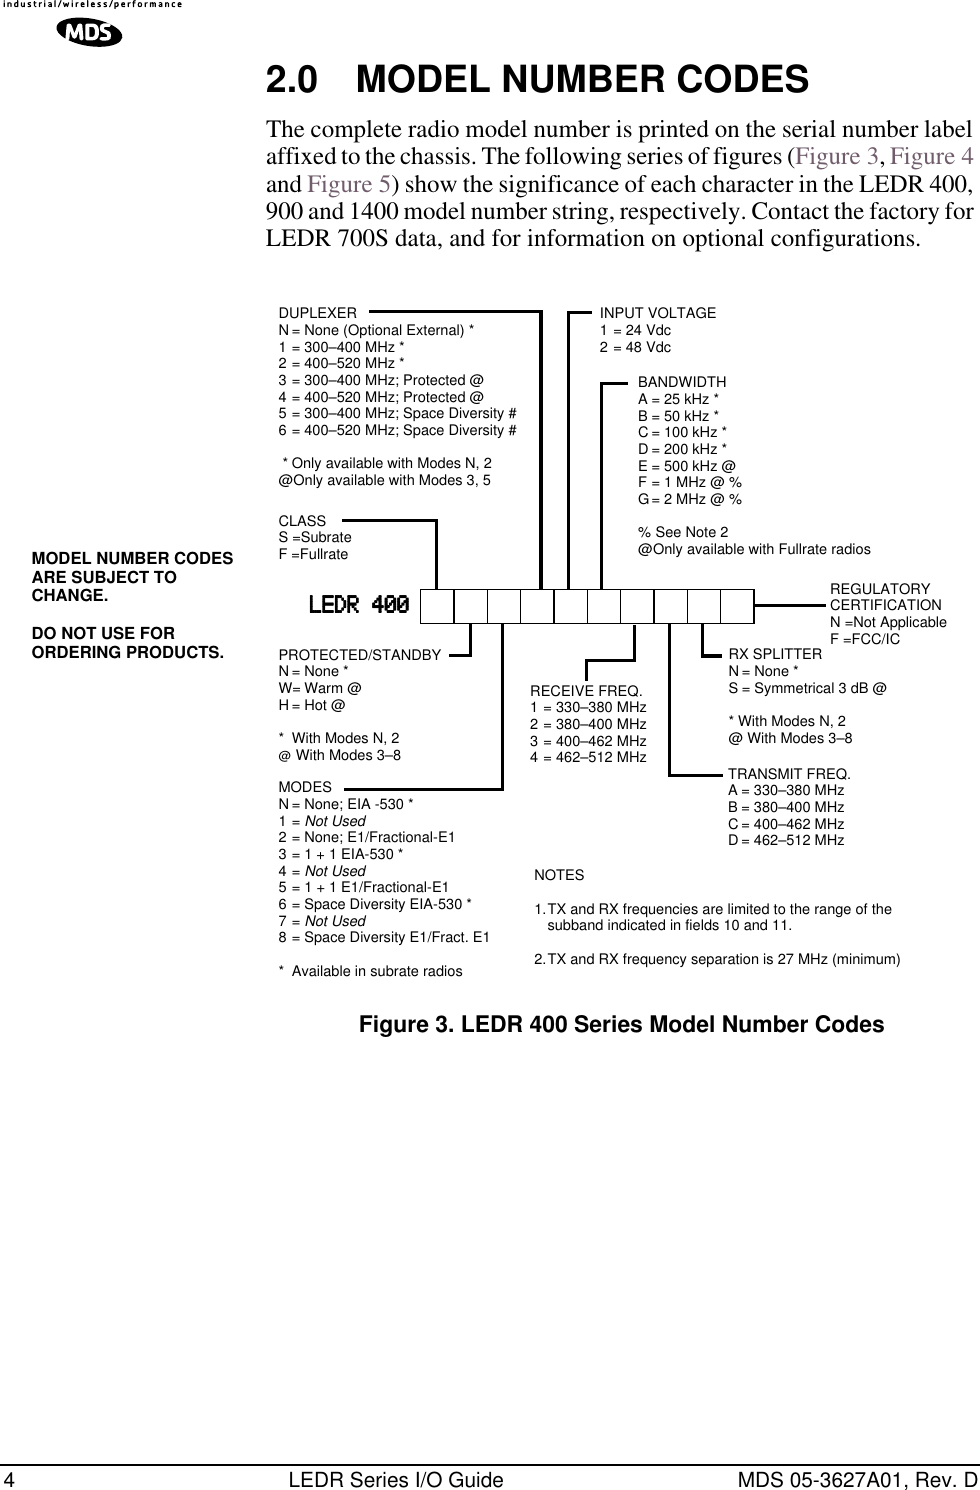  4 LEDR Series I/O Guide MDS 05-3627A01, Rev. D 2.0 MODEL NUMBER CODES The complete radio model number is printed on the serial number label affixed to the chassis. The following series of figures (Figure 3, Figure 4 and Figure 5) show the significance of each character in the LEDR 400, 900 and 1400 model number string, respectively. Contact the factory for LEDR 700S data, and for information on optional configurations. Invisible place holder Figure 3. LEDR 400 Series Model Number CodesMODEL NUMBER CODES ARE SUBJECT TO CHANGE.DO NOT USE FOR ORDERING PRODUCTS.MODESN = None; EIA -530 *1=Not Used2 = None; E1/Fractional-E13 = 1 + 1 EIA-530 *4=Not Used5 = 1 + 1 E1/Fractional-E16 = Space Diversity EIA-530 *7= Not Used8 = Space Diversity E1/Fract. E1*  Available in subrate radiosPROTECTED/STANDBYN = None *W= Warm @H = Hot @*  With Modes N, 2@ With Modes 3–8LLLLEEEEDDDDRRRR    444400000000CLASSS =SubrateF =FullrateDUPLEXERN = None (Optional External) *1 = 300–400 MHz *2 = 400–520 MHz *3 = 300–400 MHz; Protected @4 = 400–520 MHz; Protected @5 = 300–400 MHz; Space Diversity #6 = 400–520 MHz; Space Diversity # * Only available with Modes N, 2@Only available with Modes 3, 5BANDWIDTHA = 25 kHz *B = 50 kHz *C = 100 kHz *D = 200 kHz *E = 500 kHz @F = 1 MHz @ %G= 2 MHz @ % % See Note 2@Only available with Fullrate radiosNOTES1.TX and RX frequencies are limited to the range of the subband indicated in fields 10 and 11.2.TX and RX frequency separation is 27 MHz (minimum) TRANSMIT FREQ.A = 330–380 MHzB = 380–400 MHzC = 400–462 MHzD = 462–512 MHzREGULATORY CERTIFICATIONN =Not ApplicableF =FCC/ICRX SPLITTERN = None *S = Symmetrical 3 dB @* With Modes N, 2@ With Modes 3–8INPUT VOLTAGE1 = 24 Vdc2 = 48 VdcRECEIVE FREQ.1 = 330–380 MHz2 = 380–400 MHz3 = 400–462 MHz4 = 462–512 MHz